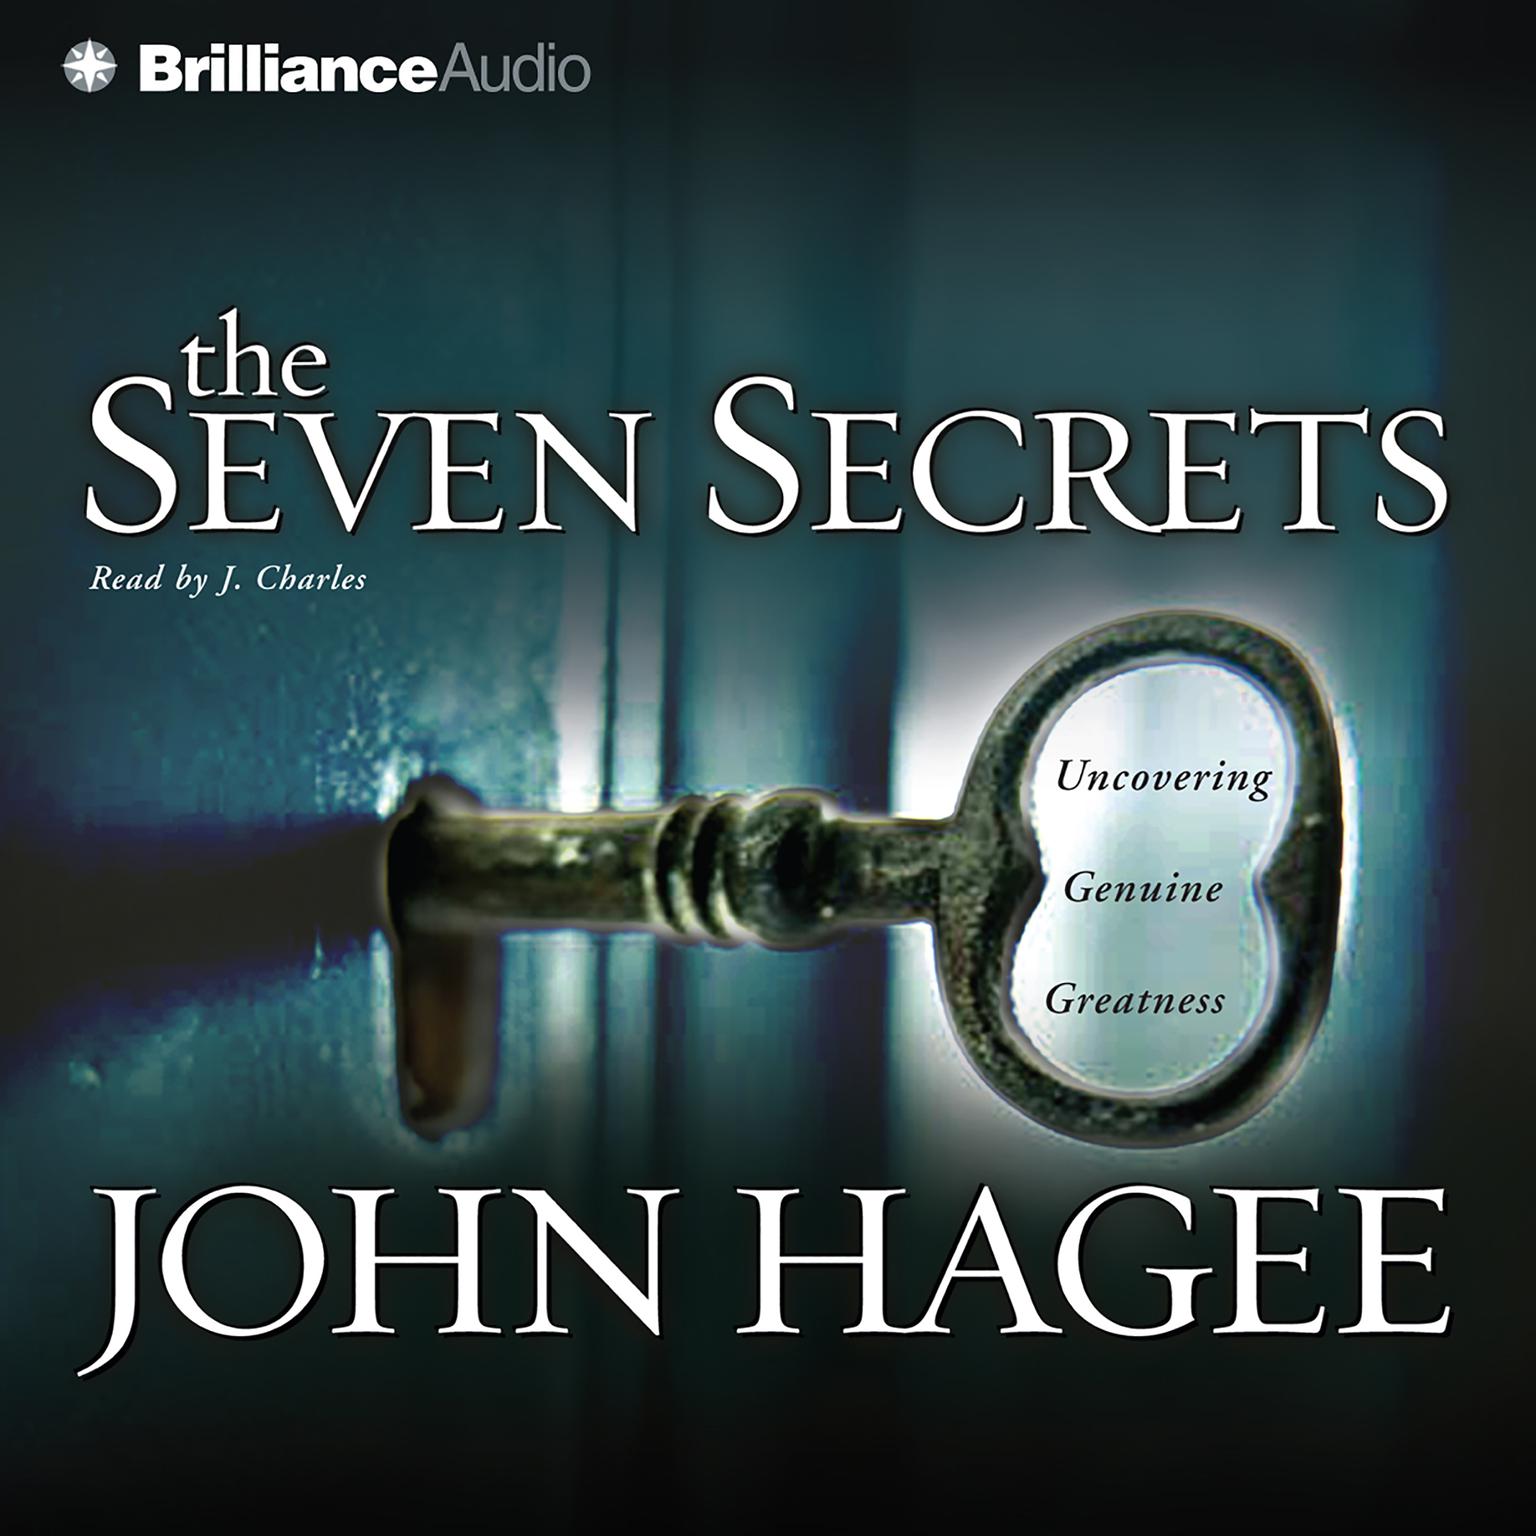 The Seven Secrets (Abridged): Uncovering Genuine Greatness Audiobook, by John Hagee